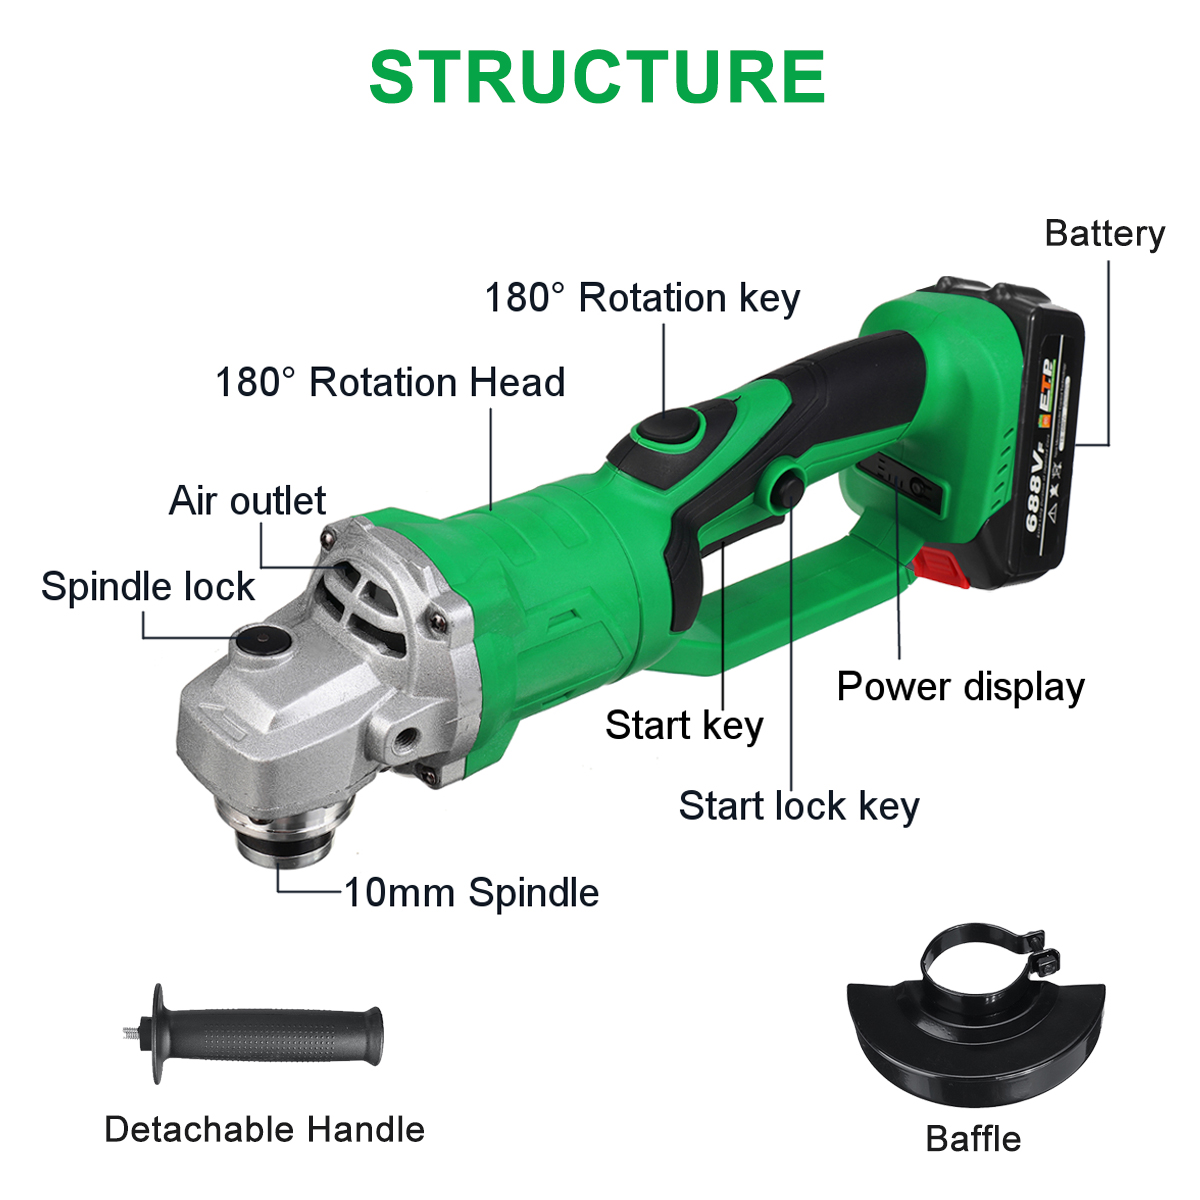 688VF-1200W-100mm-Brushless-Electric-Angle-Grinder-180deg-Rotation-3-Gears-Cutting-Grinding-Tool-Ind-1859330-7